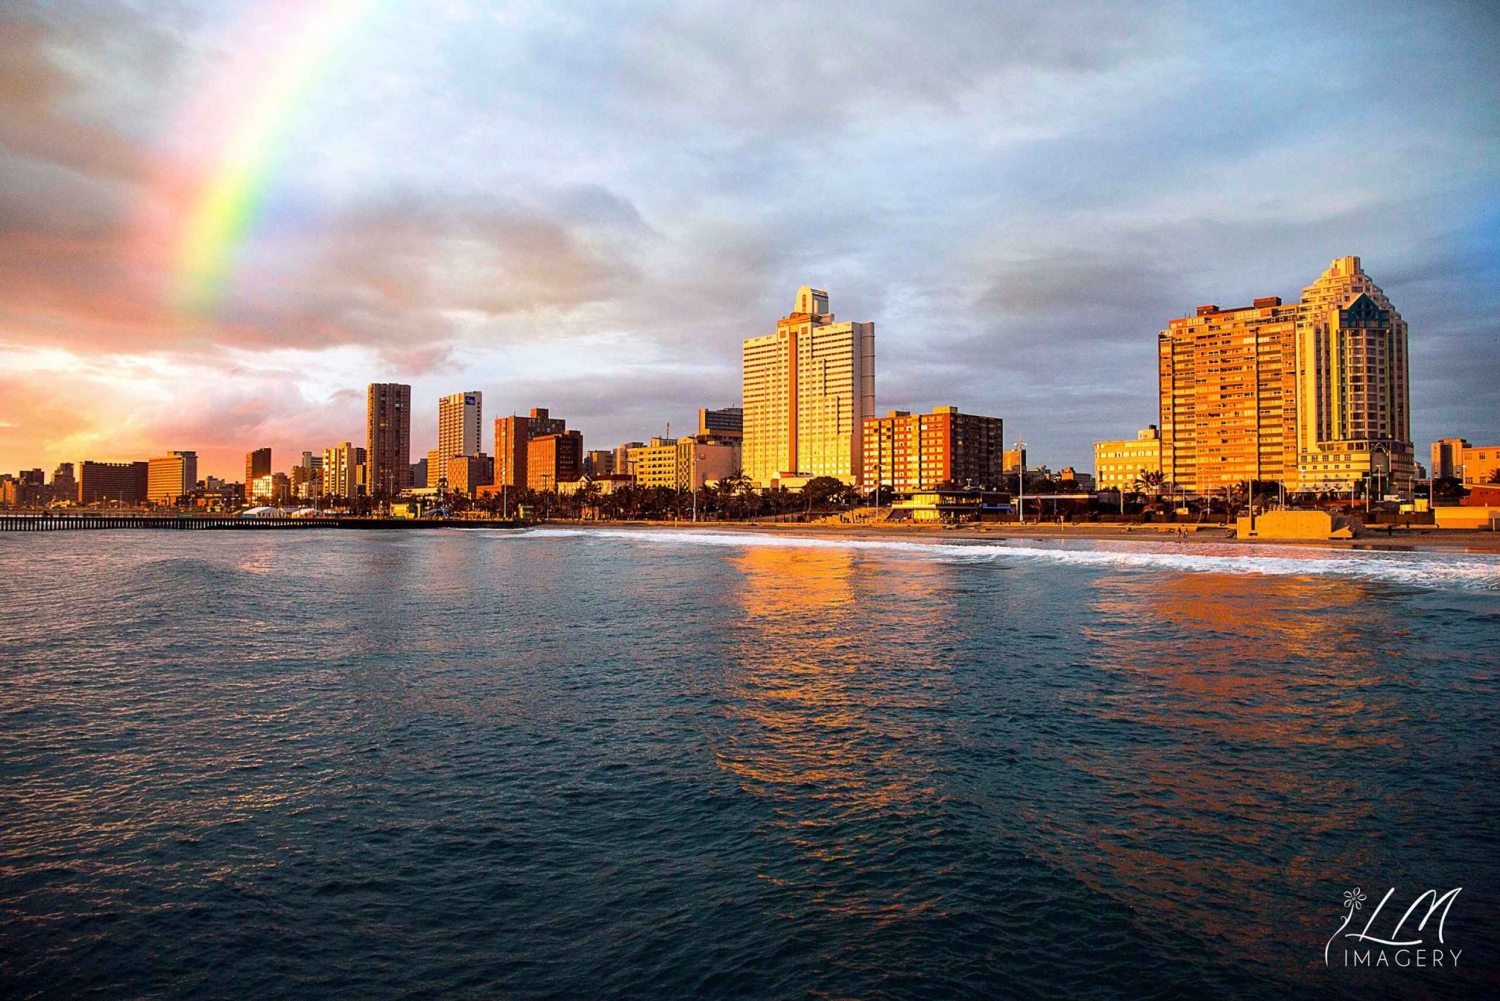 Durban: Top 10 City Sights Private Tour